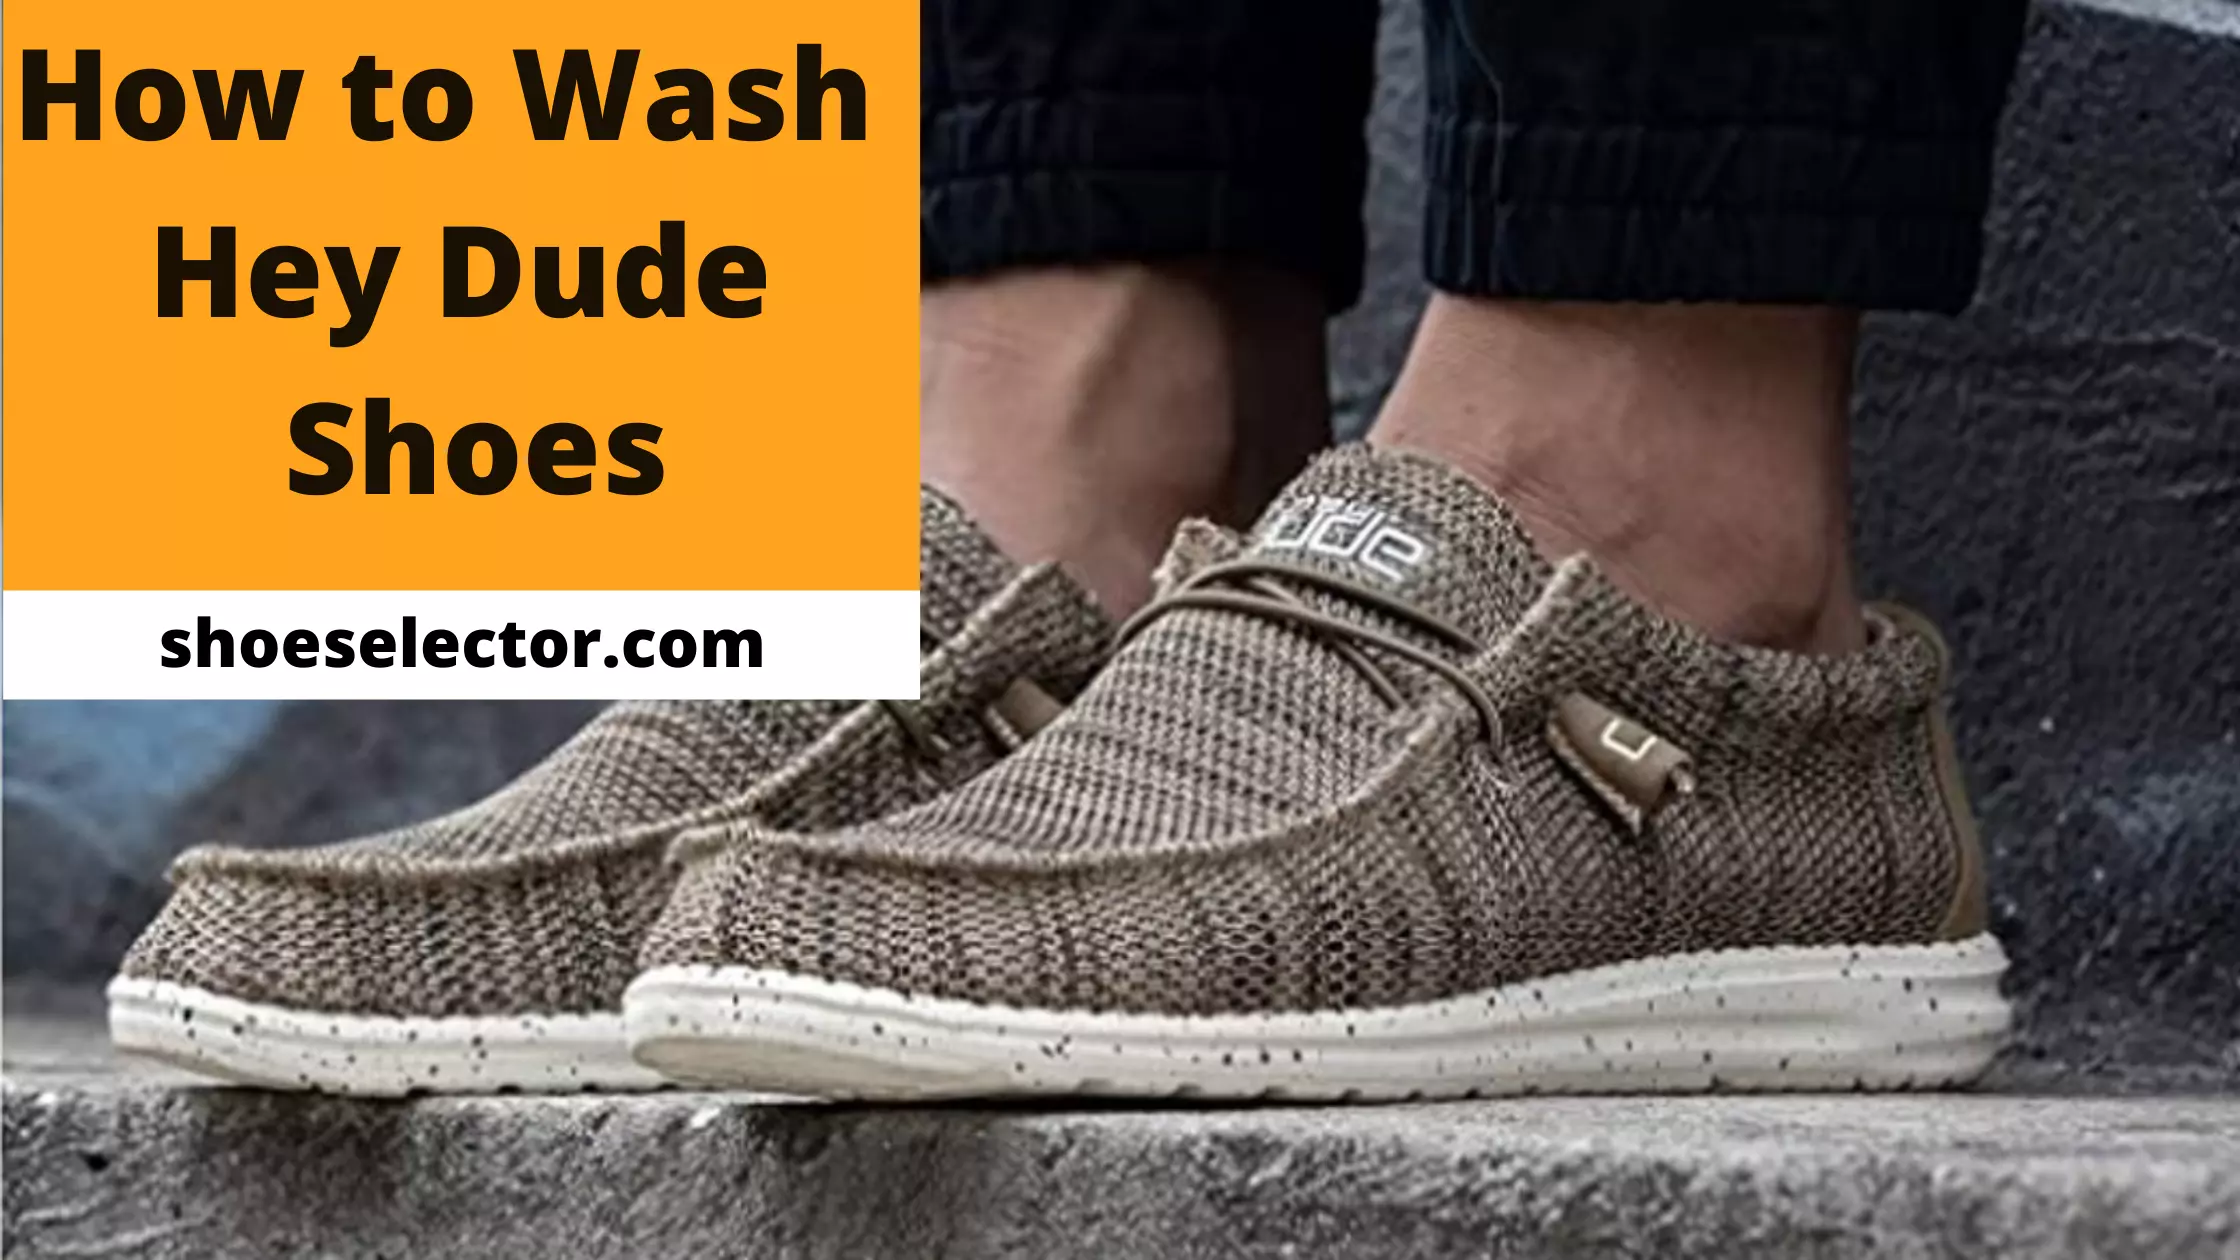 How To Wash Hey Dude Shoes? - Unique Guide